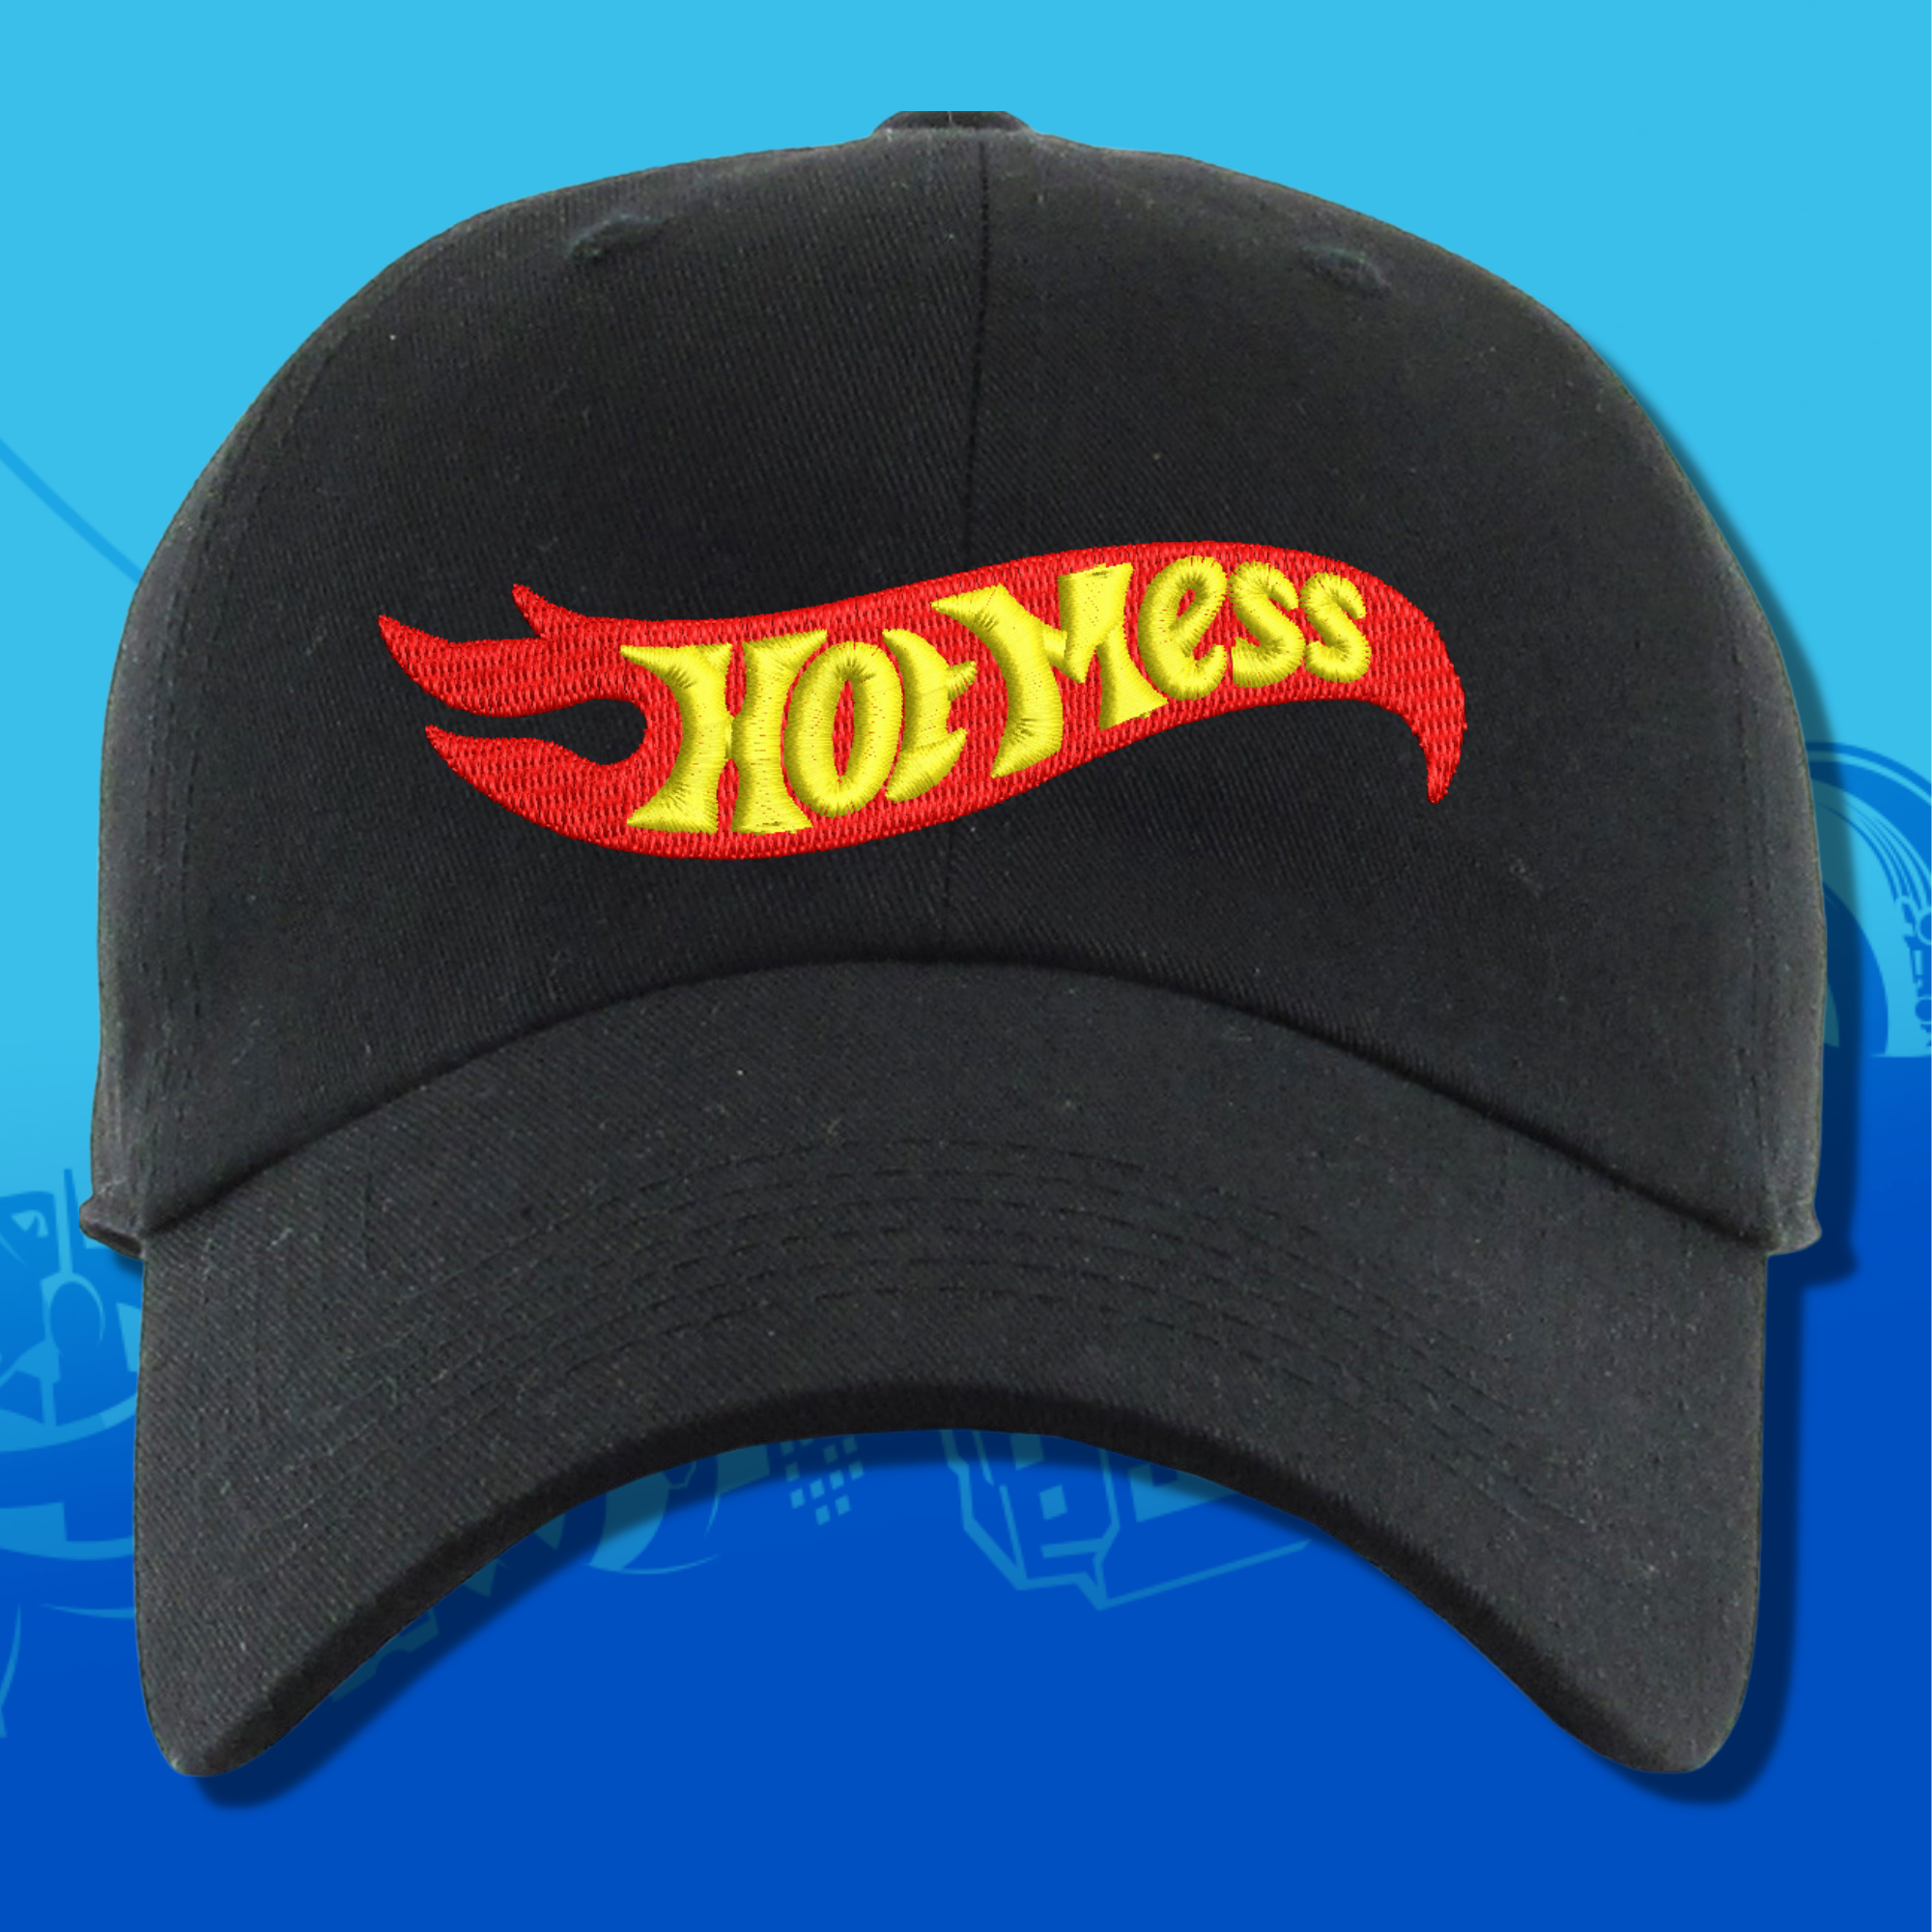 Hot Mess Embroidered Black Dad Hat, One Size Fits All